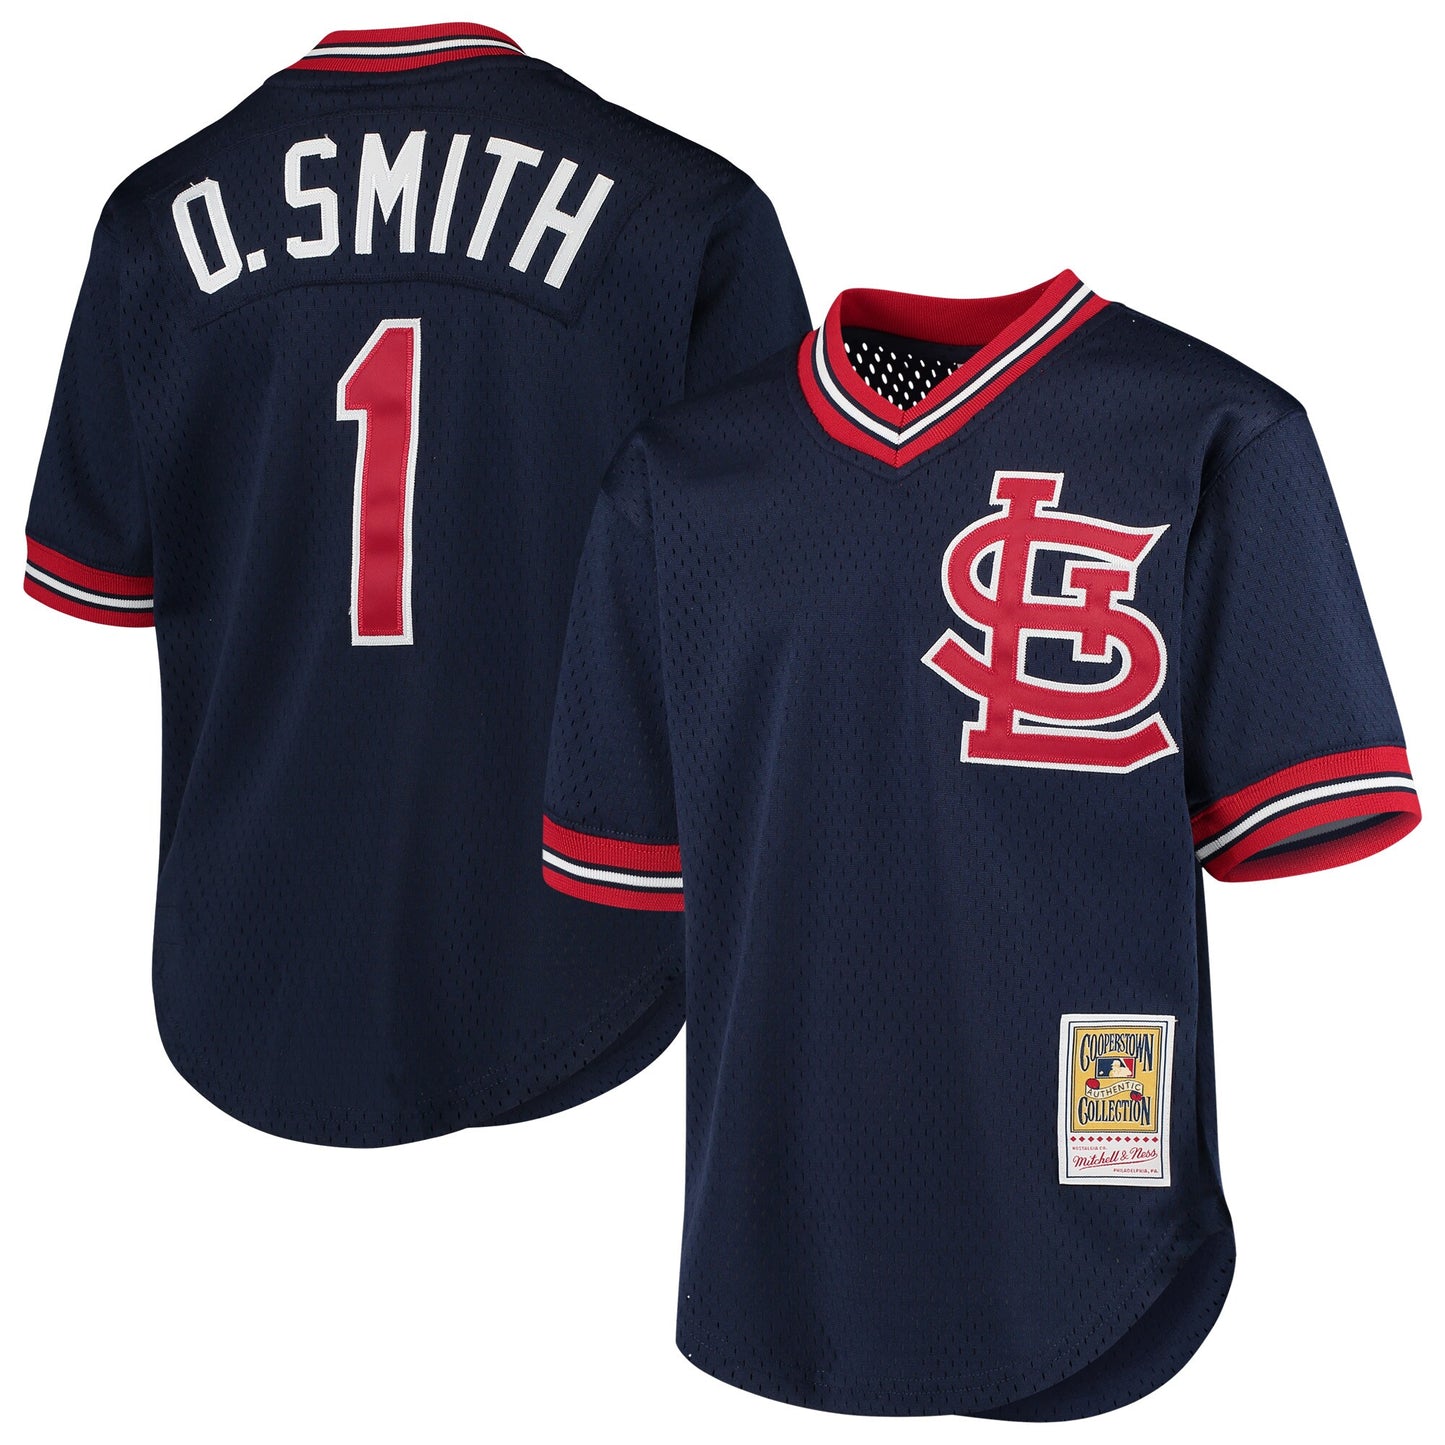 Ozzie Smith St. Louis Cardinals Mitchell & Ness Youth Cooperstown Collection Mesh Batting Practice Jersey - Navy